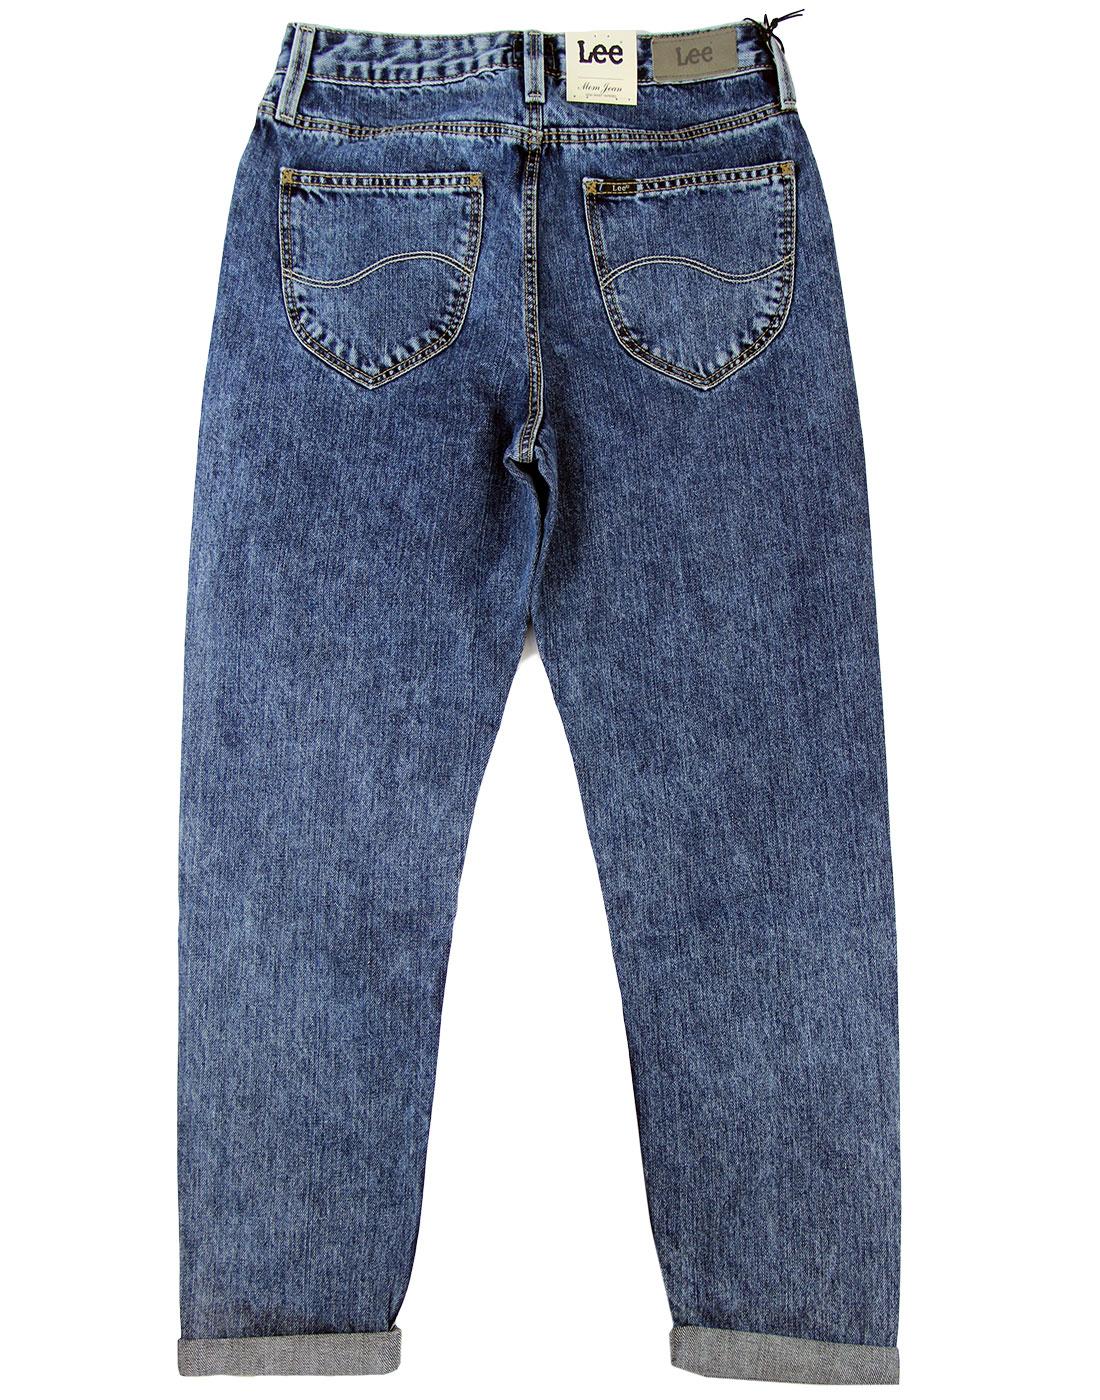 LEE Mom Jeans - Relazxed Fit Tapered Leg Retro Jeans Ice Cloud